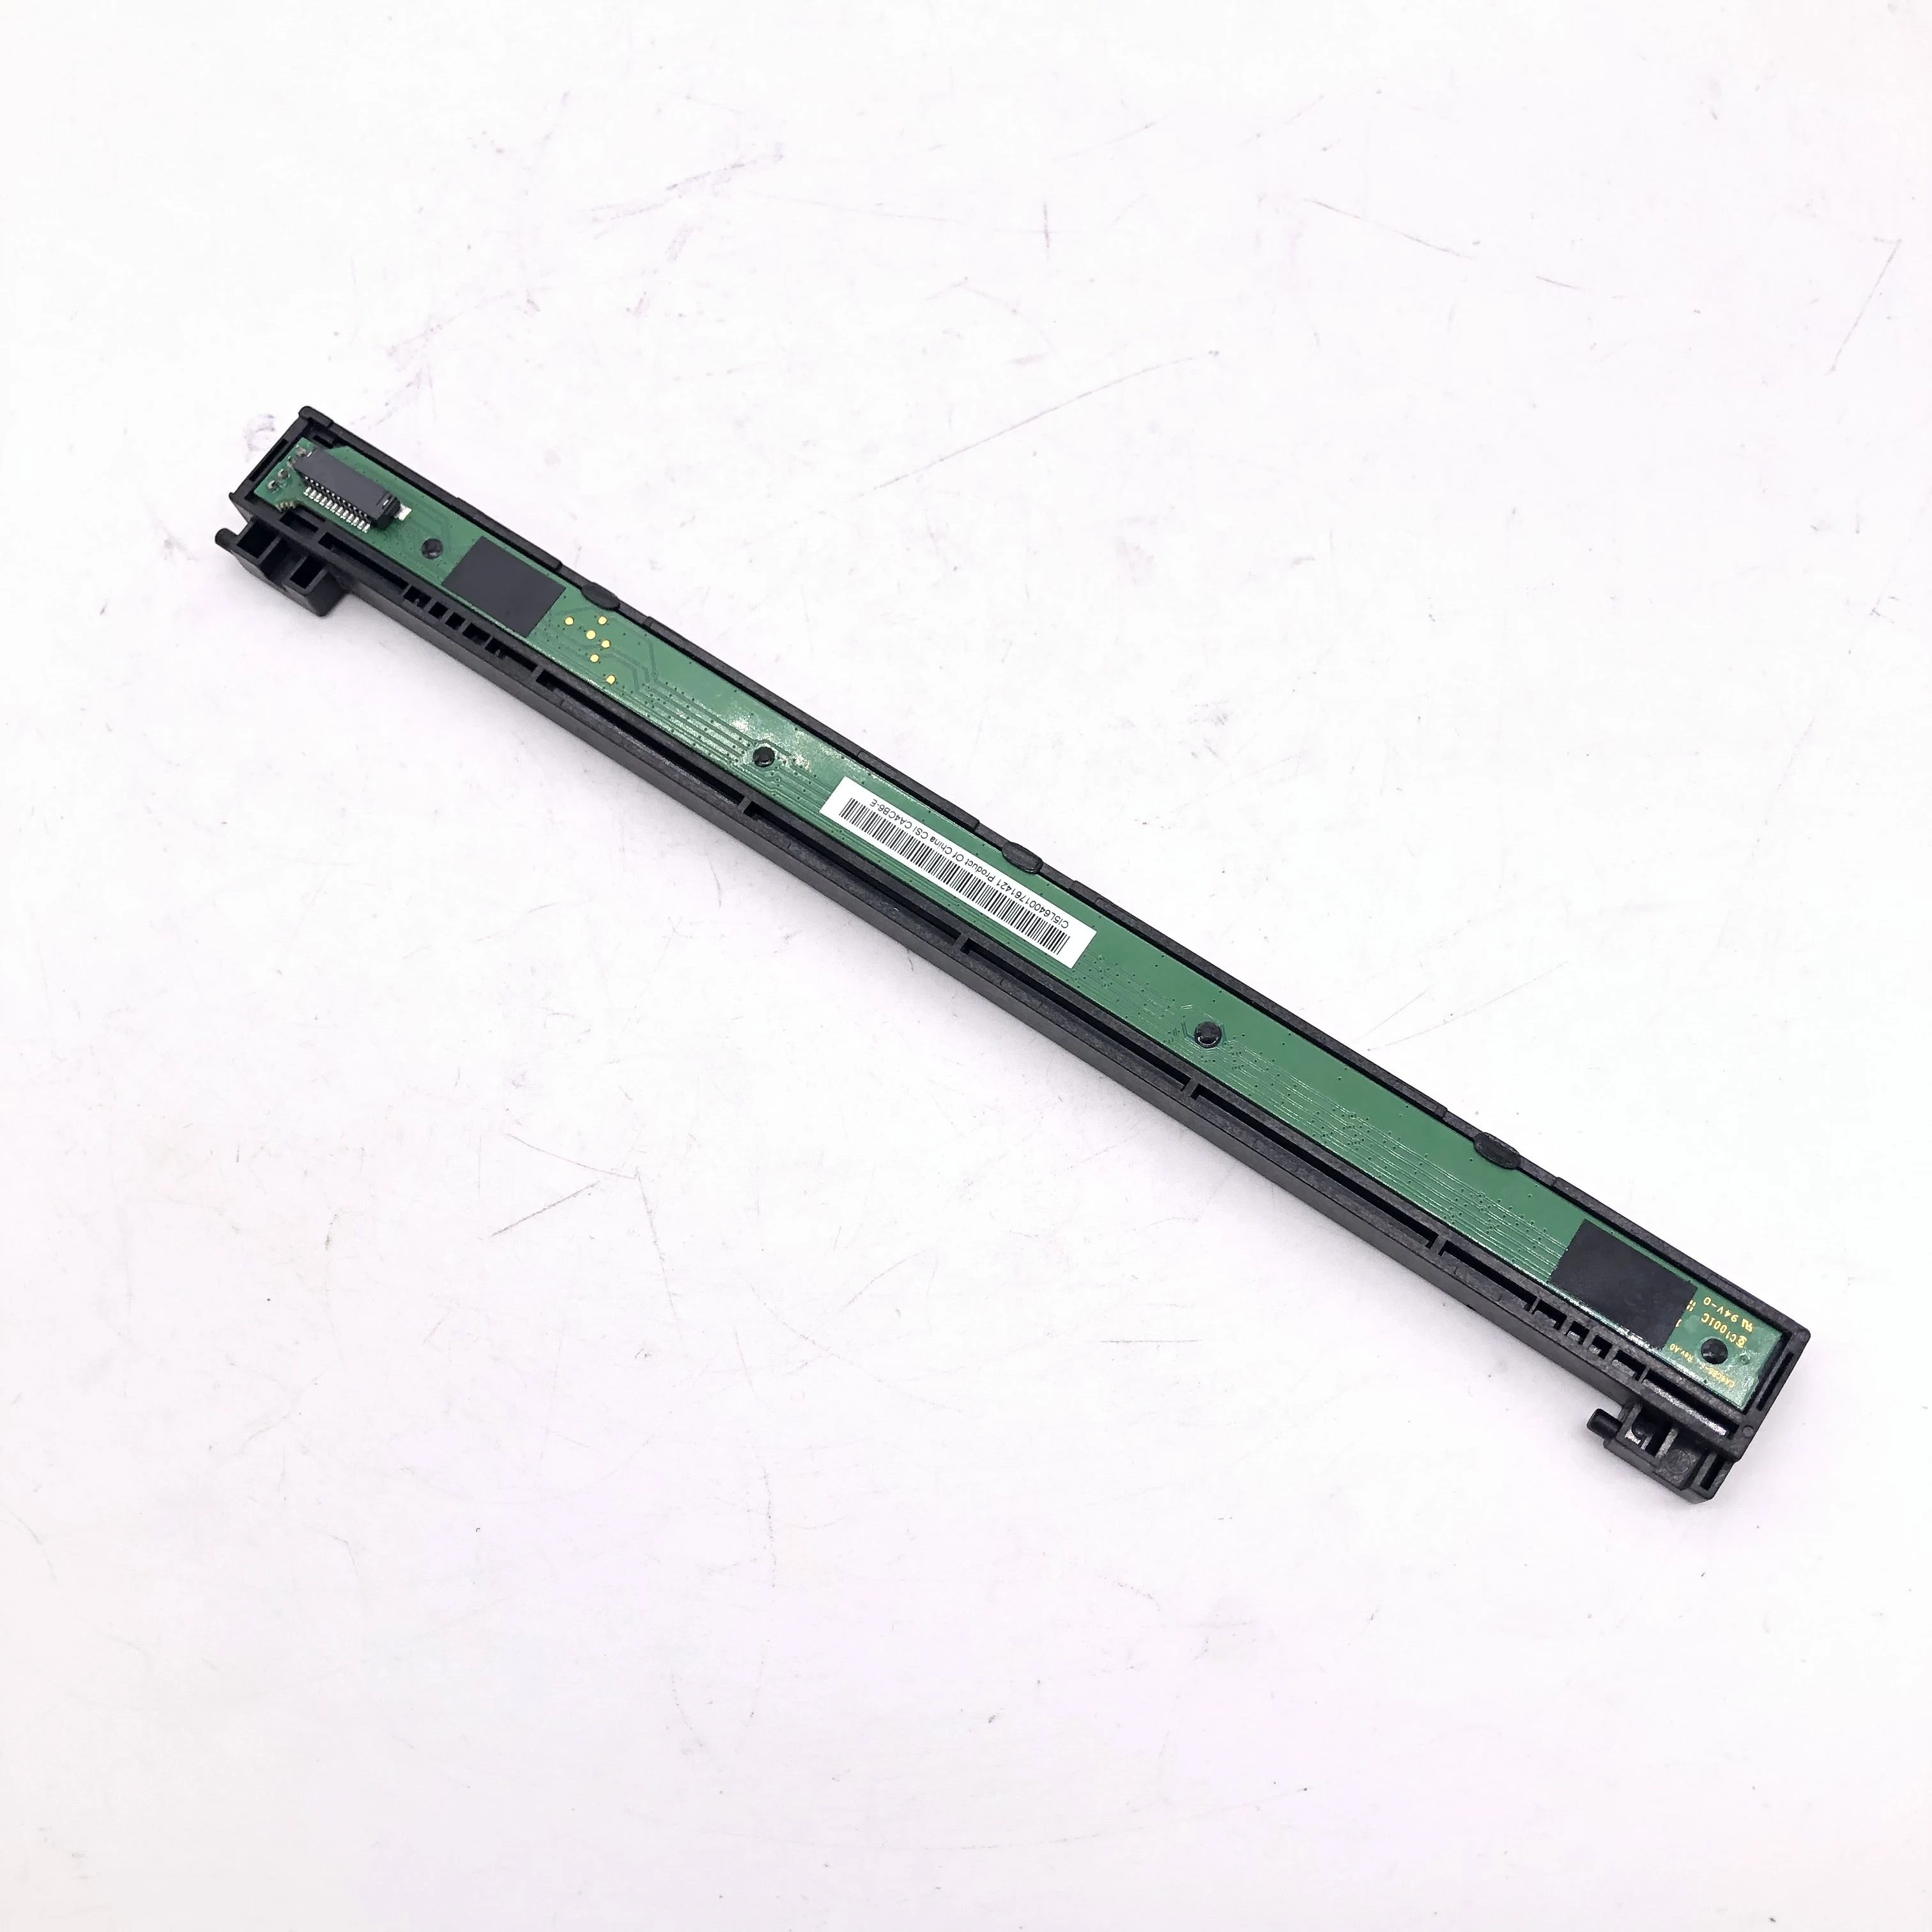 

CA4CB6-B Scanner Unit fits for brother MFC7240 FAX2890 FAX2990 7290 2840 2890 MFC7290 2990 FAX2840 7240